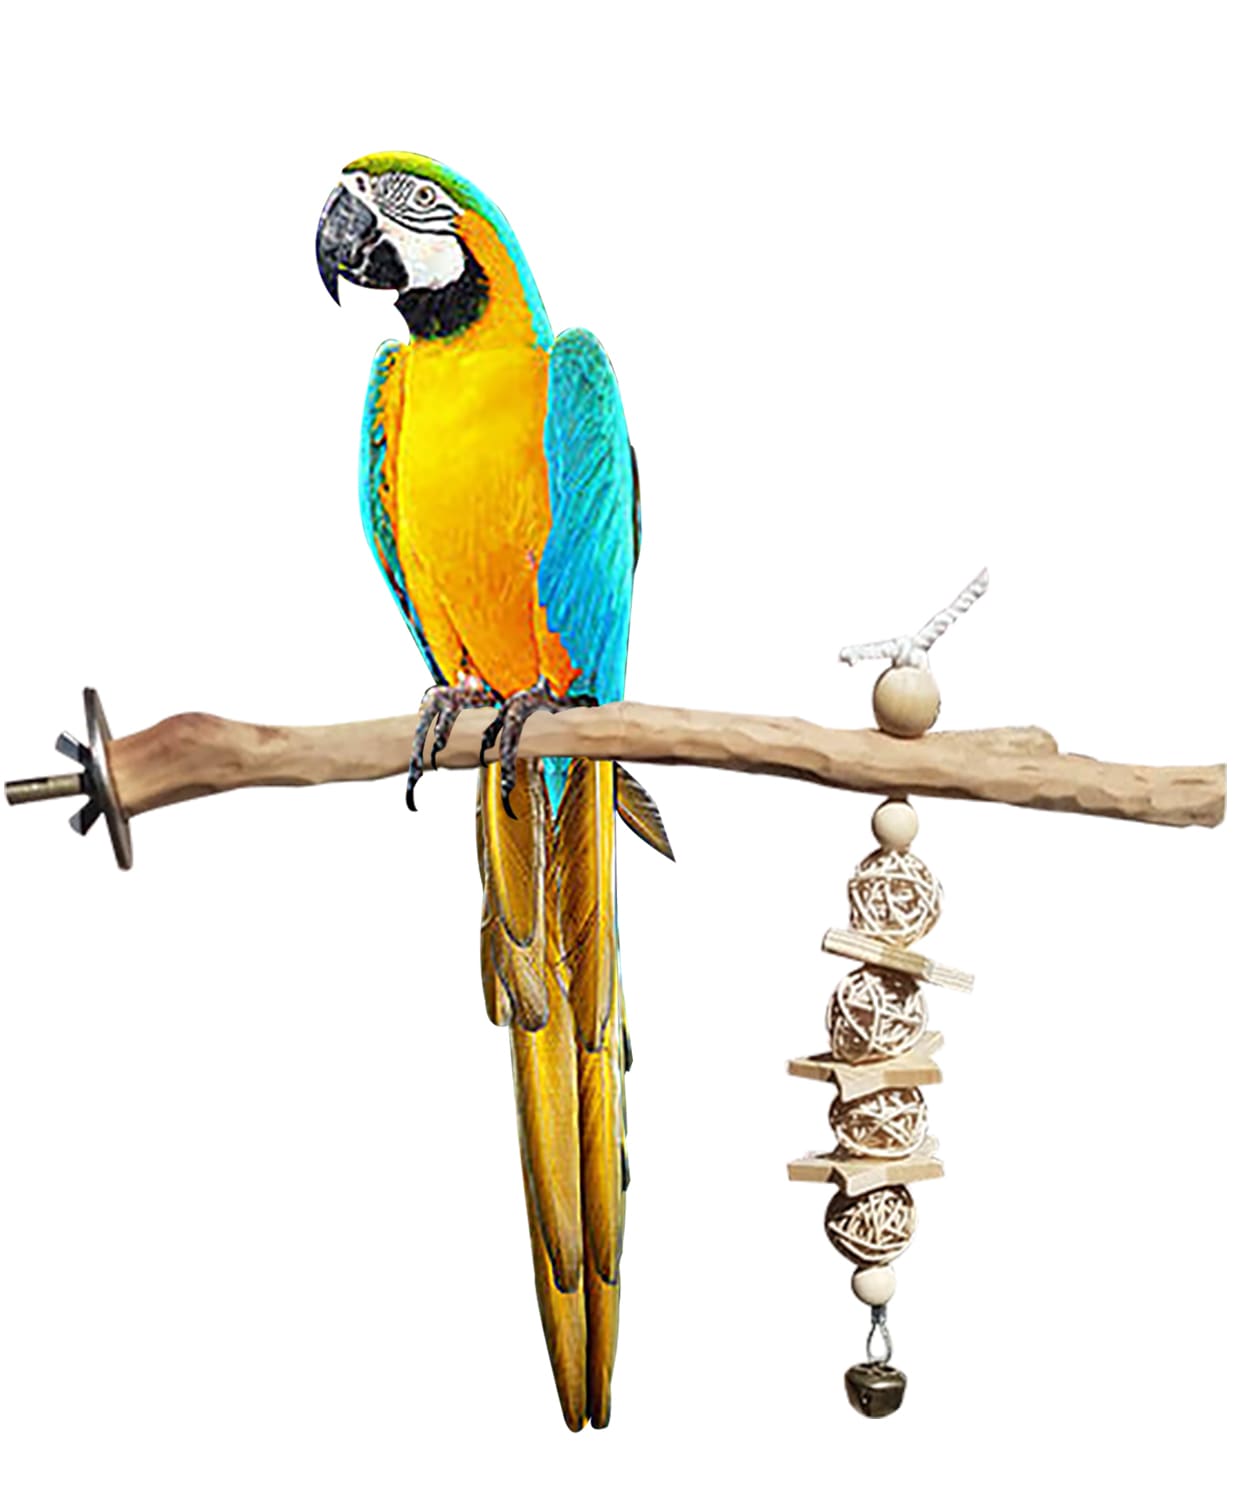 CRAFTMAVEN  HARDWOOD BIRD TOY #2: LARGE HARDWOOD PLAY ROOST WITH CLIMBING ROPE AND BELL